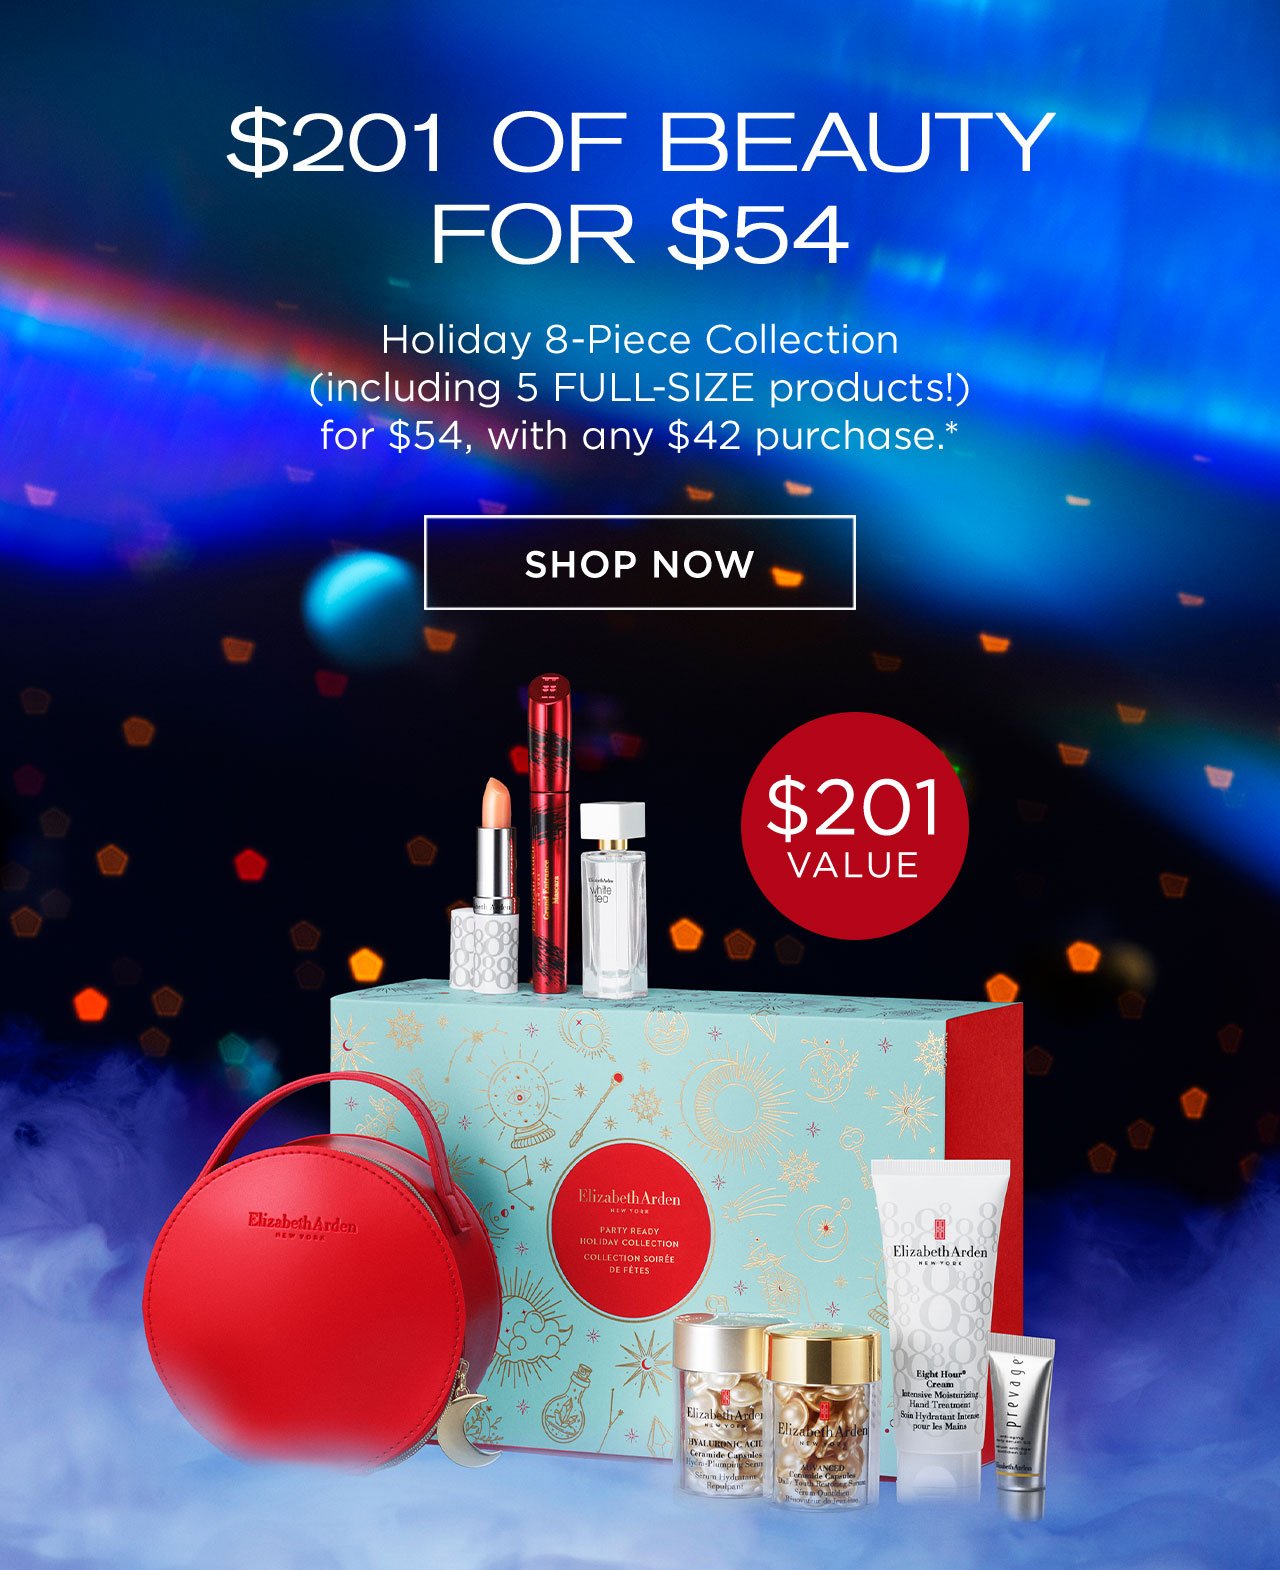 $201 OF BEAUTY FOR $54Holiday 8-Piece Collection (including 5 FULL-SIZE products!) for $54, with any $42 purchase.*SHOP NOW (CTA)